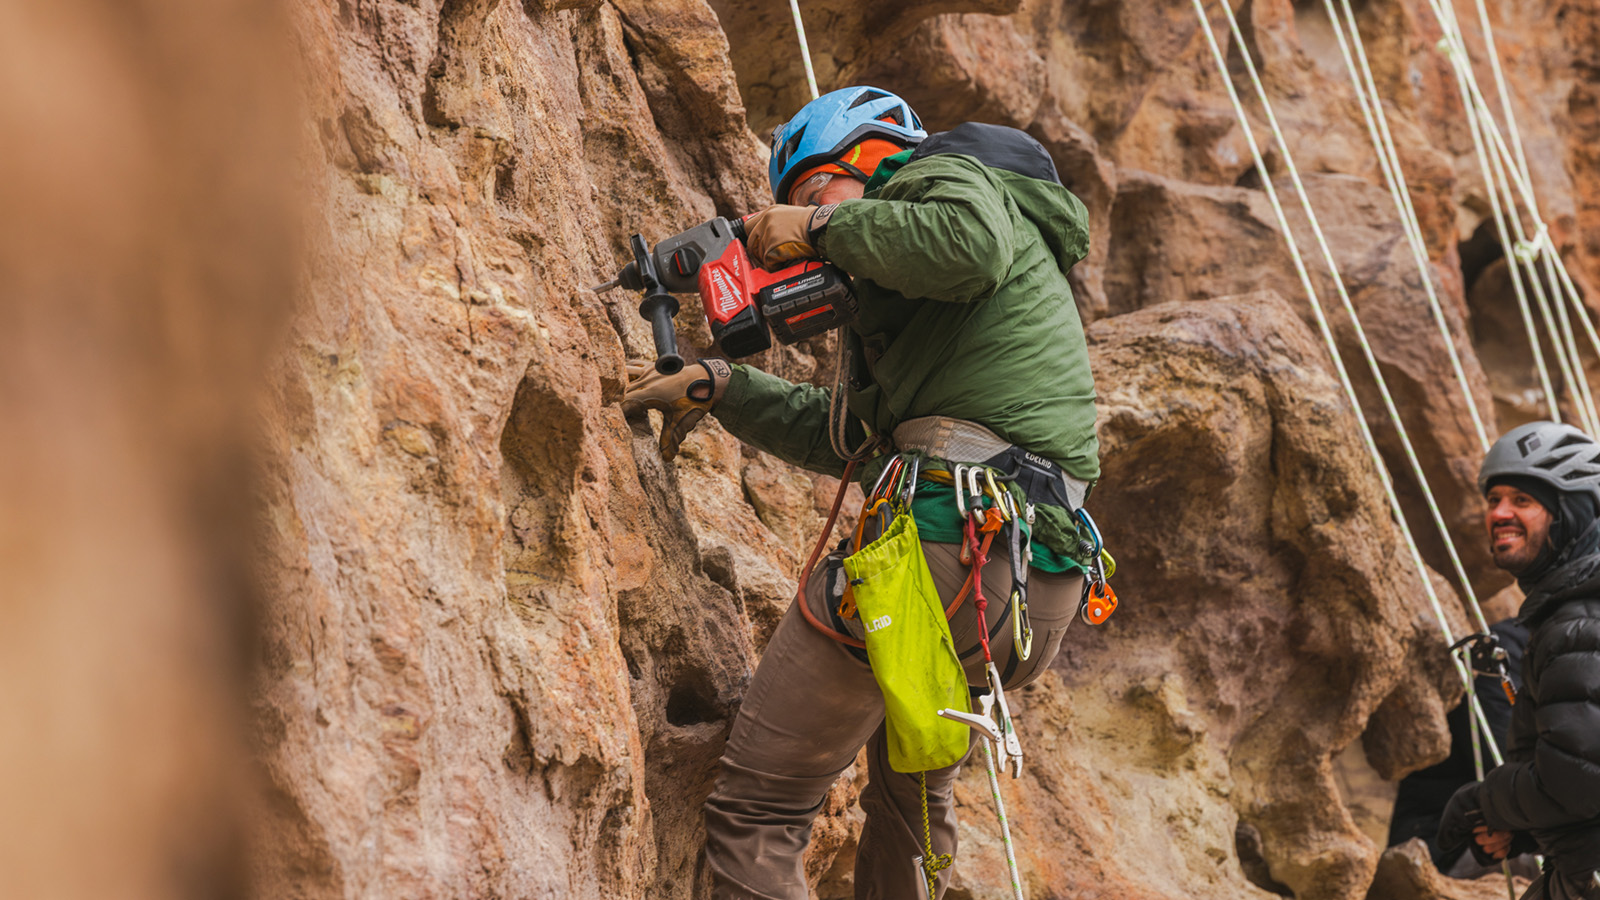 Re-bolting climbing routes at Smith Rock State Park near Bend, OR